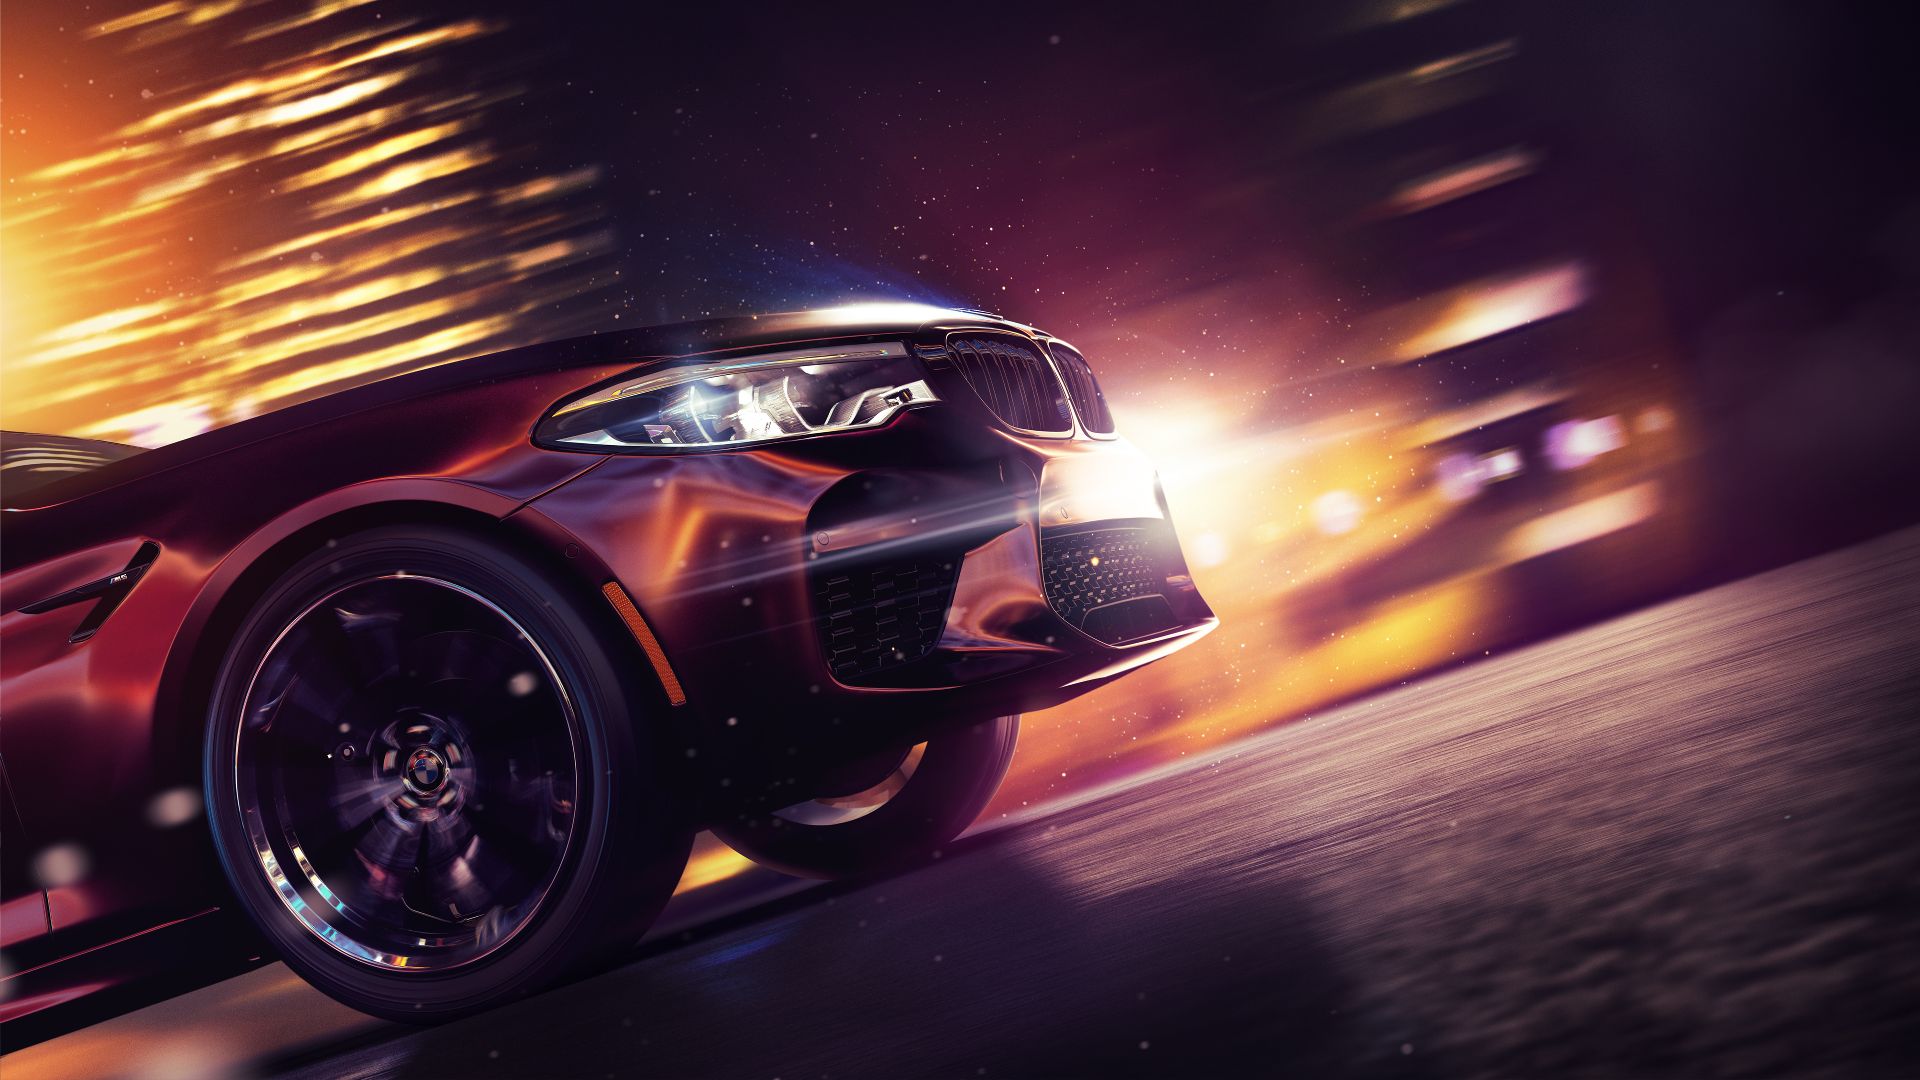 need for speed payback download content